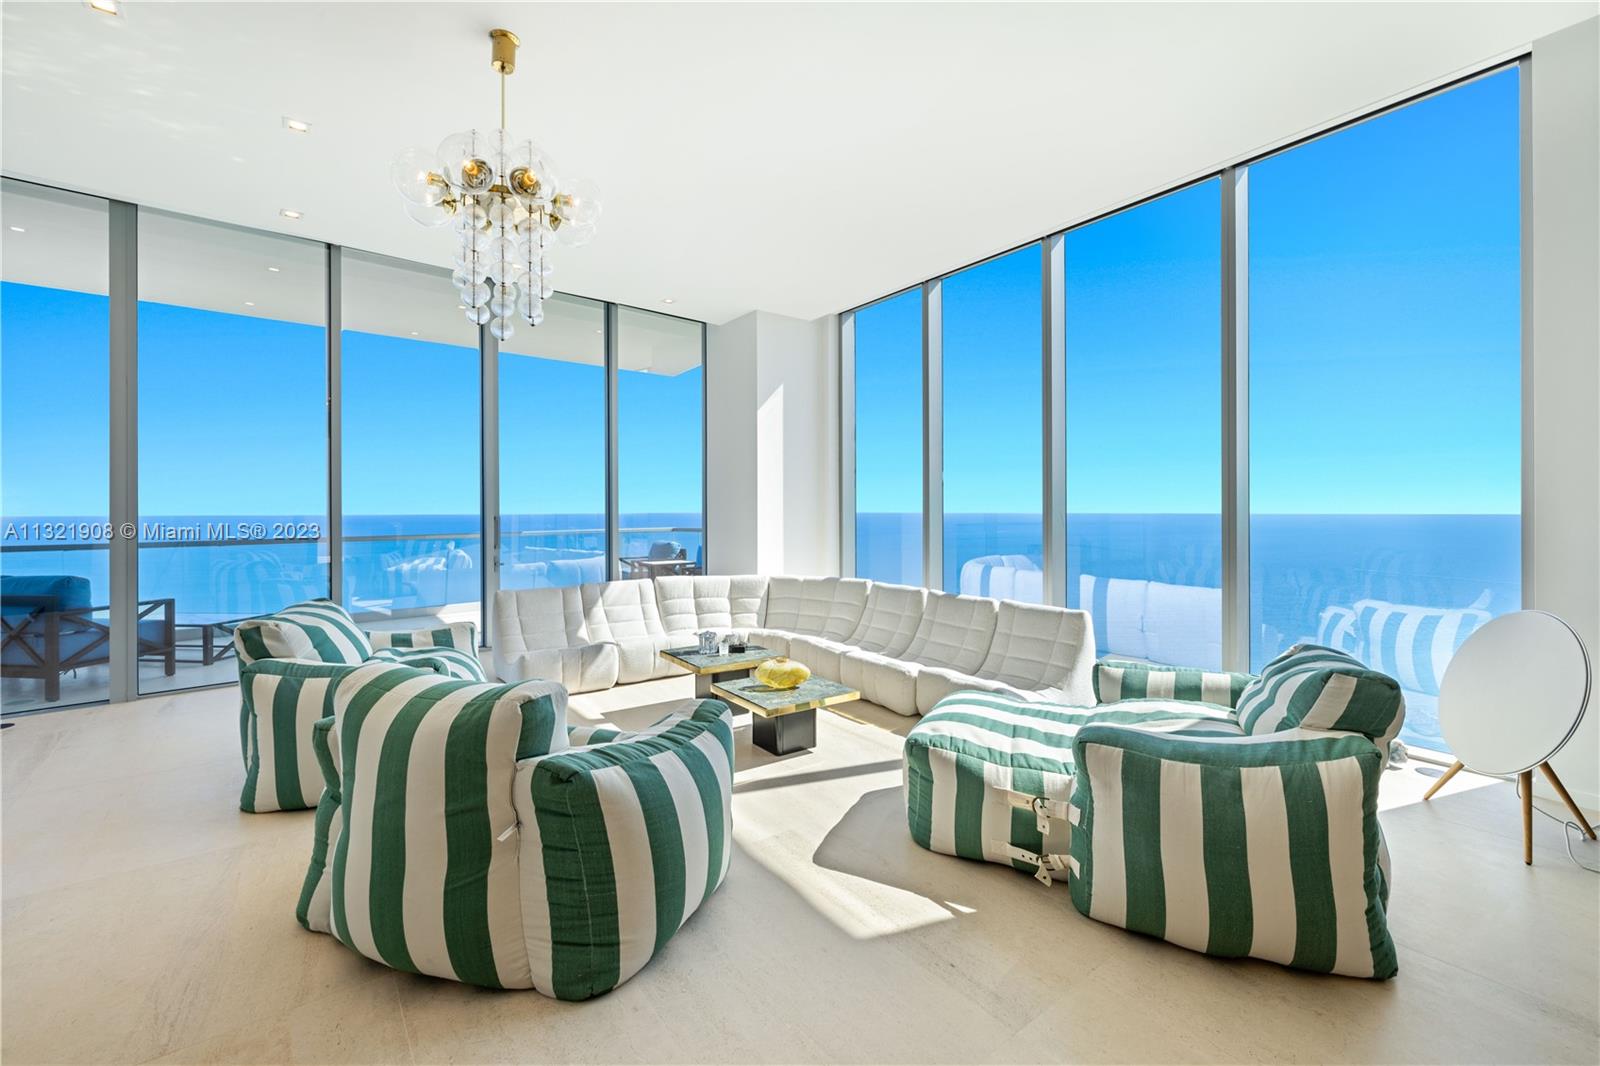 This one-of-a-kind furniture-ready residence features 12” CEILING heights, w breathtaking views from the 42nd floor. Flow thru residence w direct views of the ocean and intracoastal waterway. This residence features custom floors, upgraded imported Snaidero® Italian cabinetry & stone countertops, top-of the line Gaggenau® appliances, 11' deep oceanfront sunrise terrace w summer kitchen + sunset terrace, spacious walk-in closets. Turnberry Ocean Club Residences is composed of 70,000 SF of luxury amenities w unrivaled, world- class service incl 3-story (30-32) private signature Sky Club w sunrise/sunset pools, private dining, health & wellness spa & entertainment.